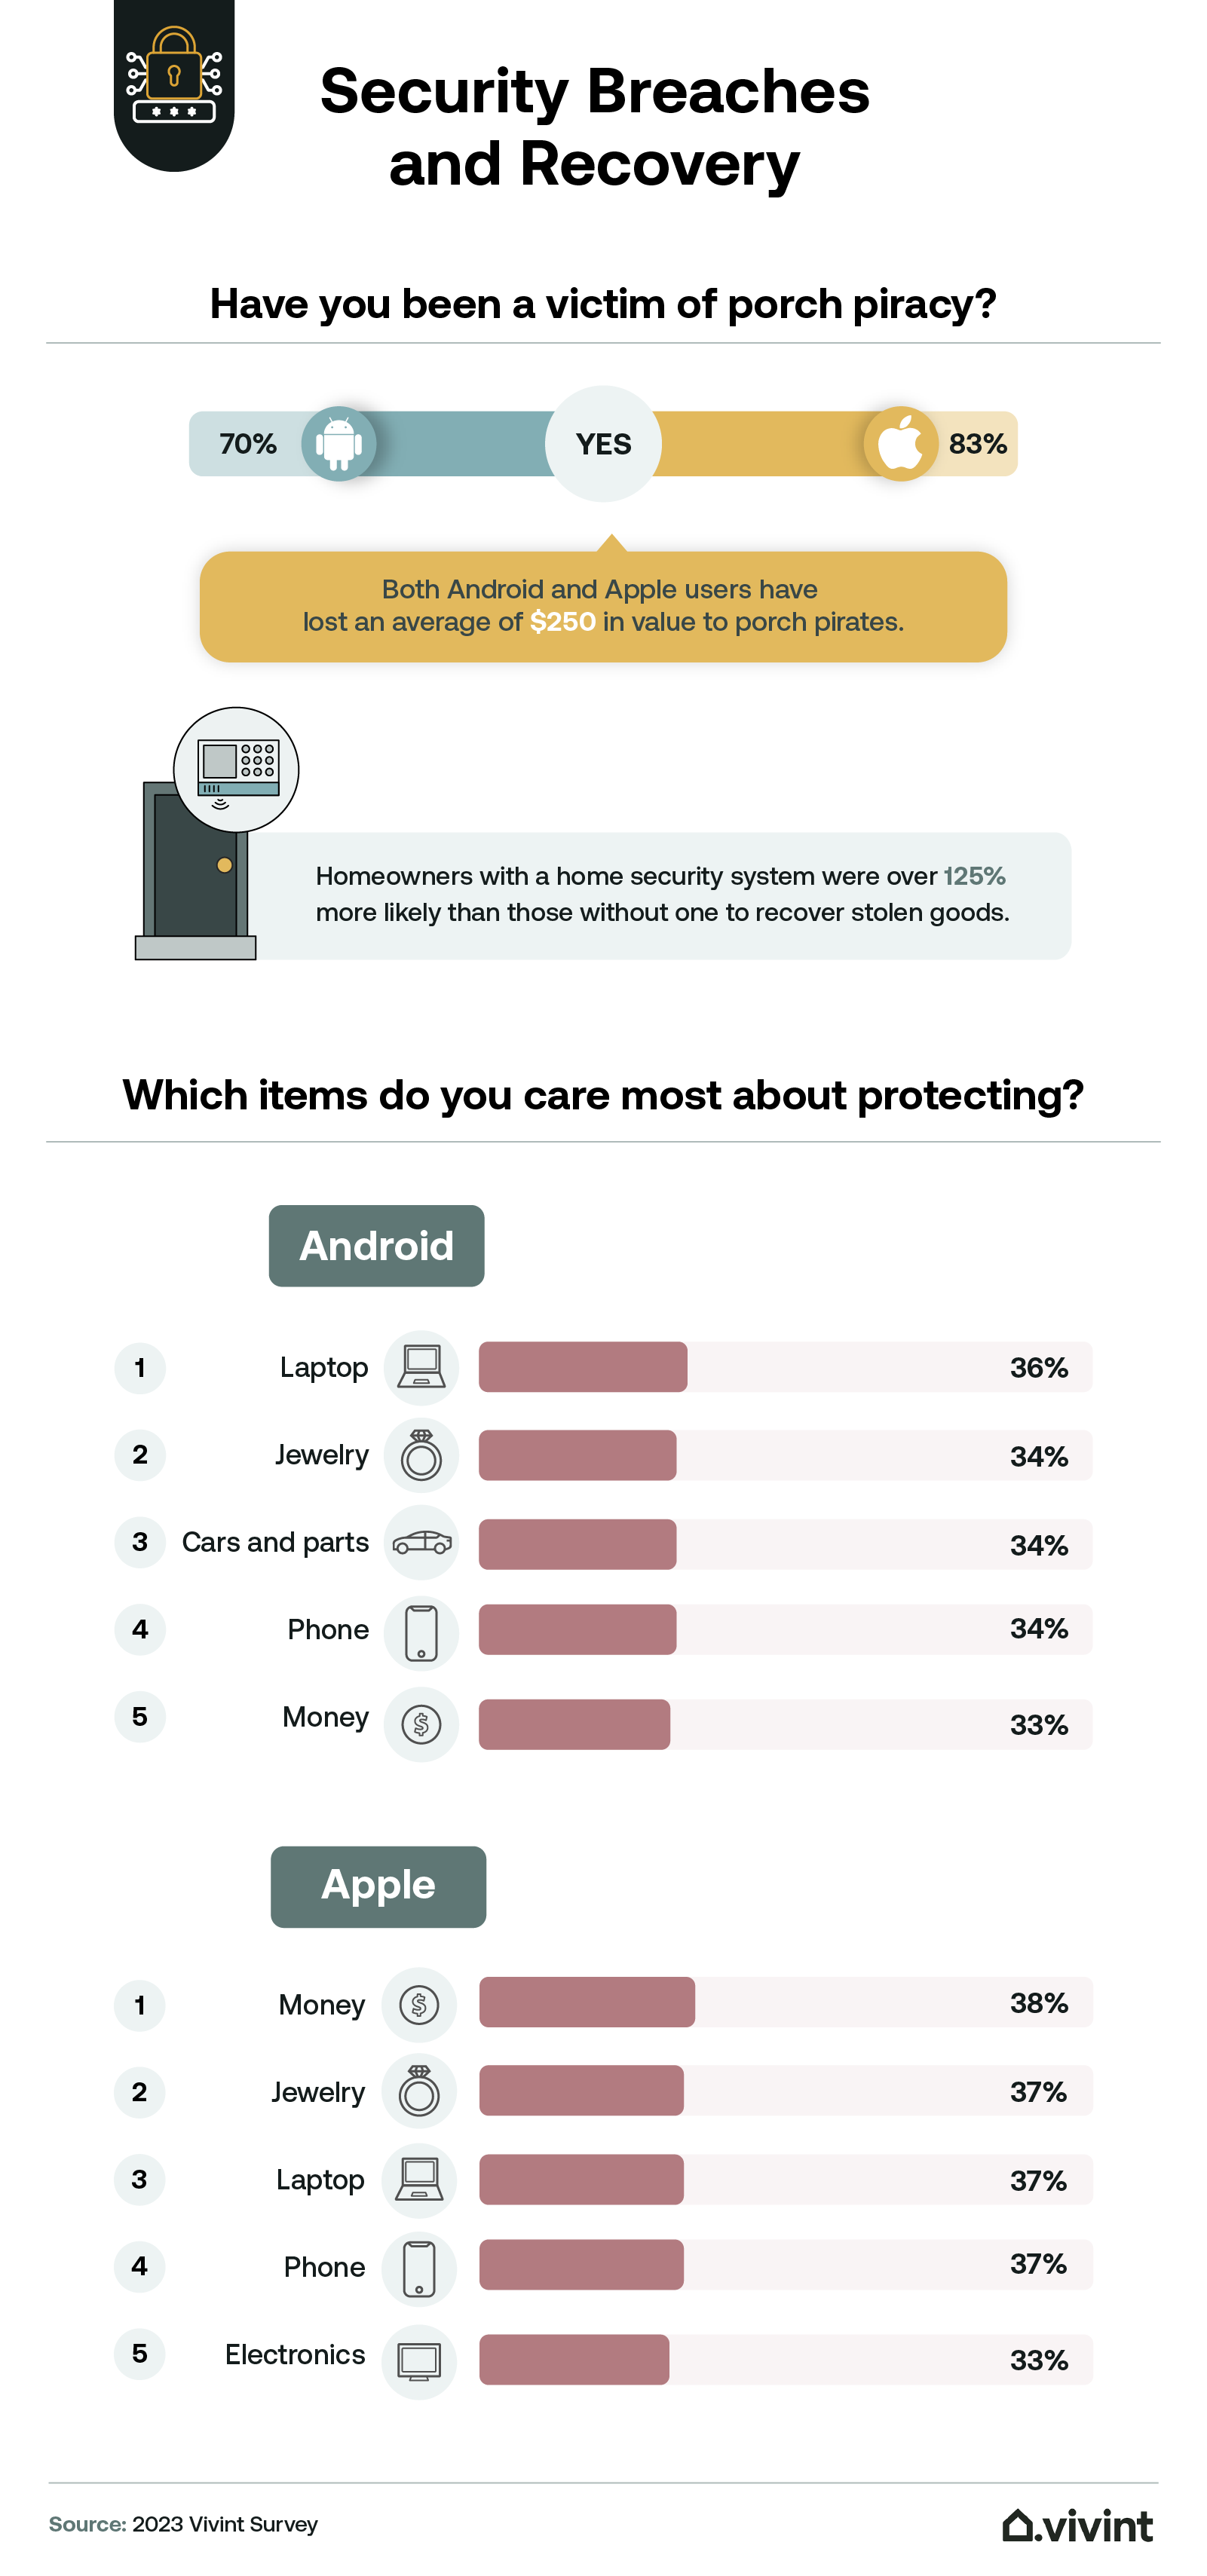 Information about which items people care most about protecting in their homes.